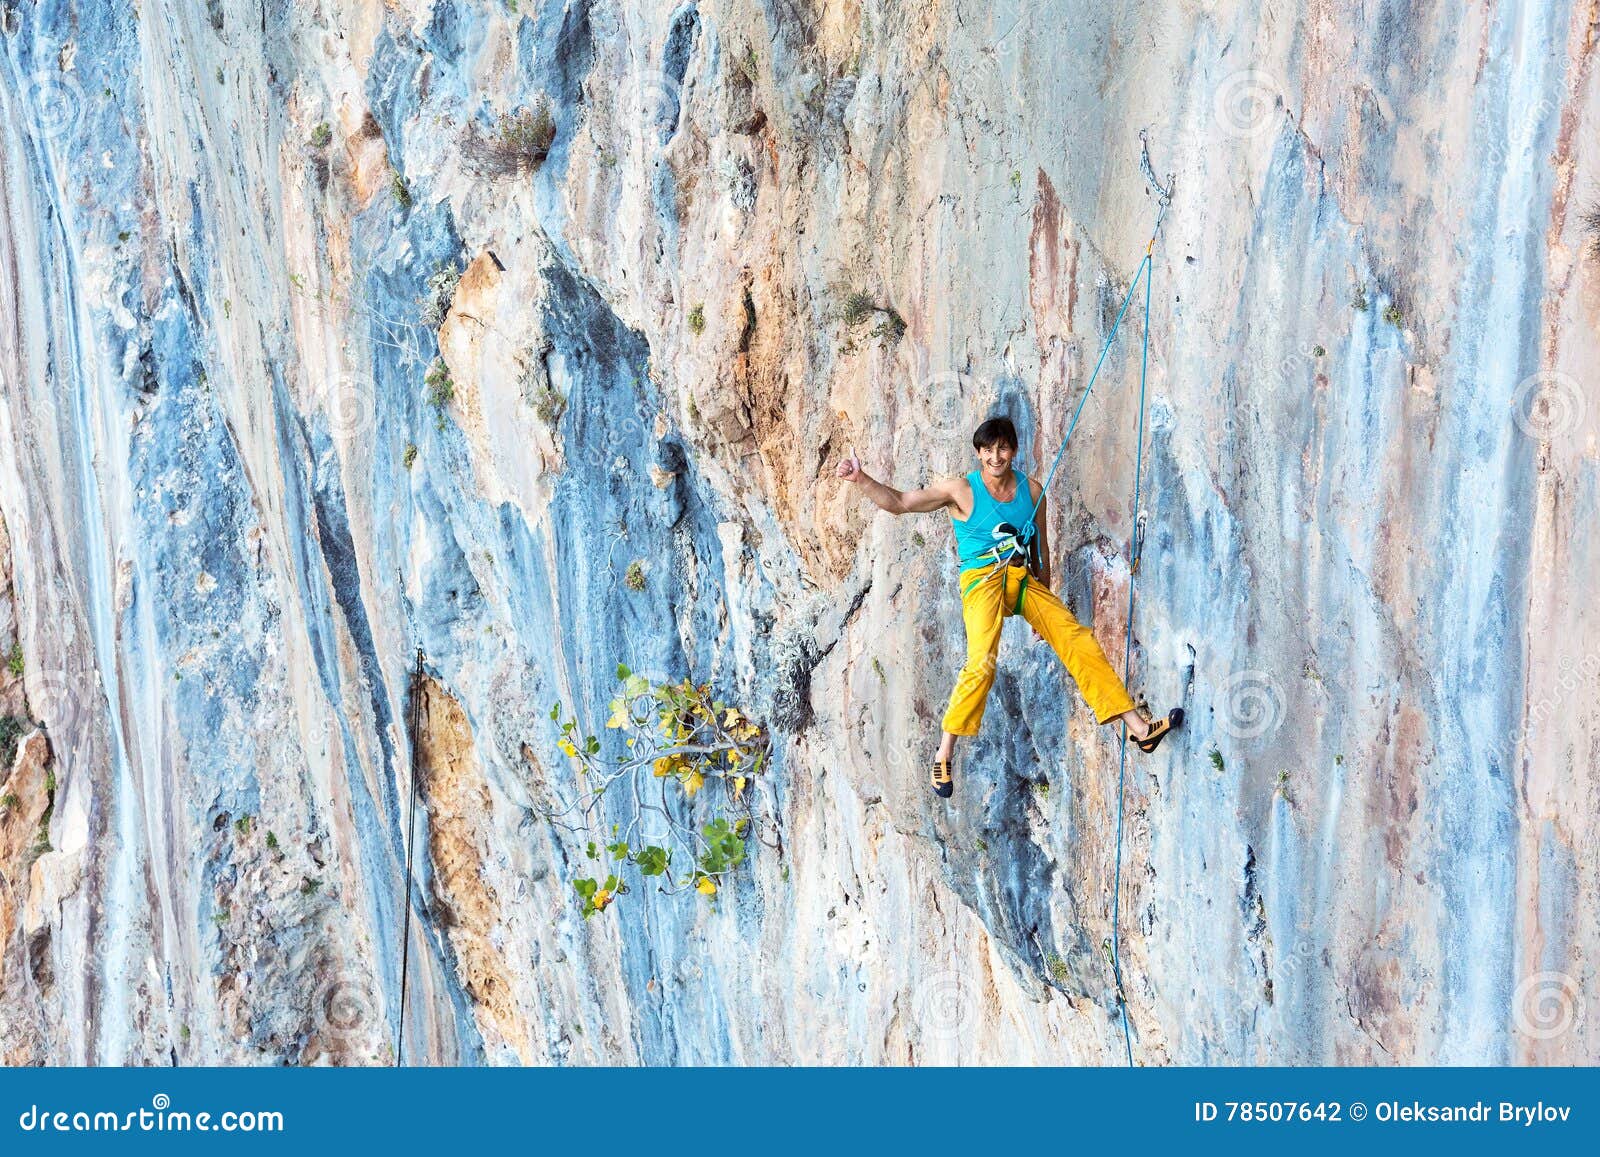 smiling male rock climber descending on rope with okey hand sign